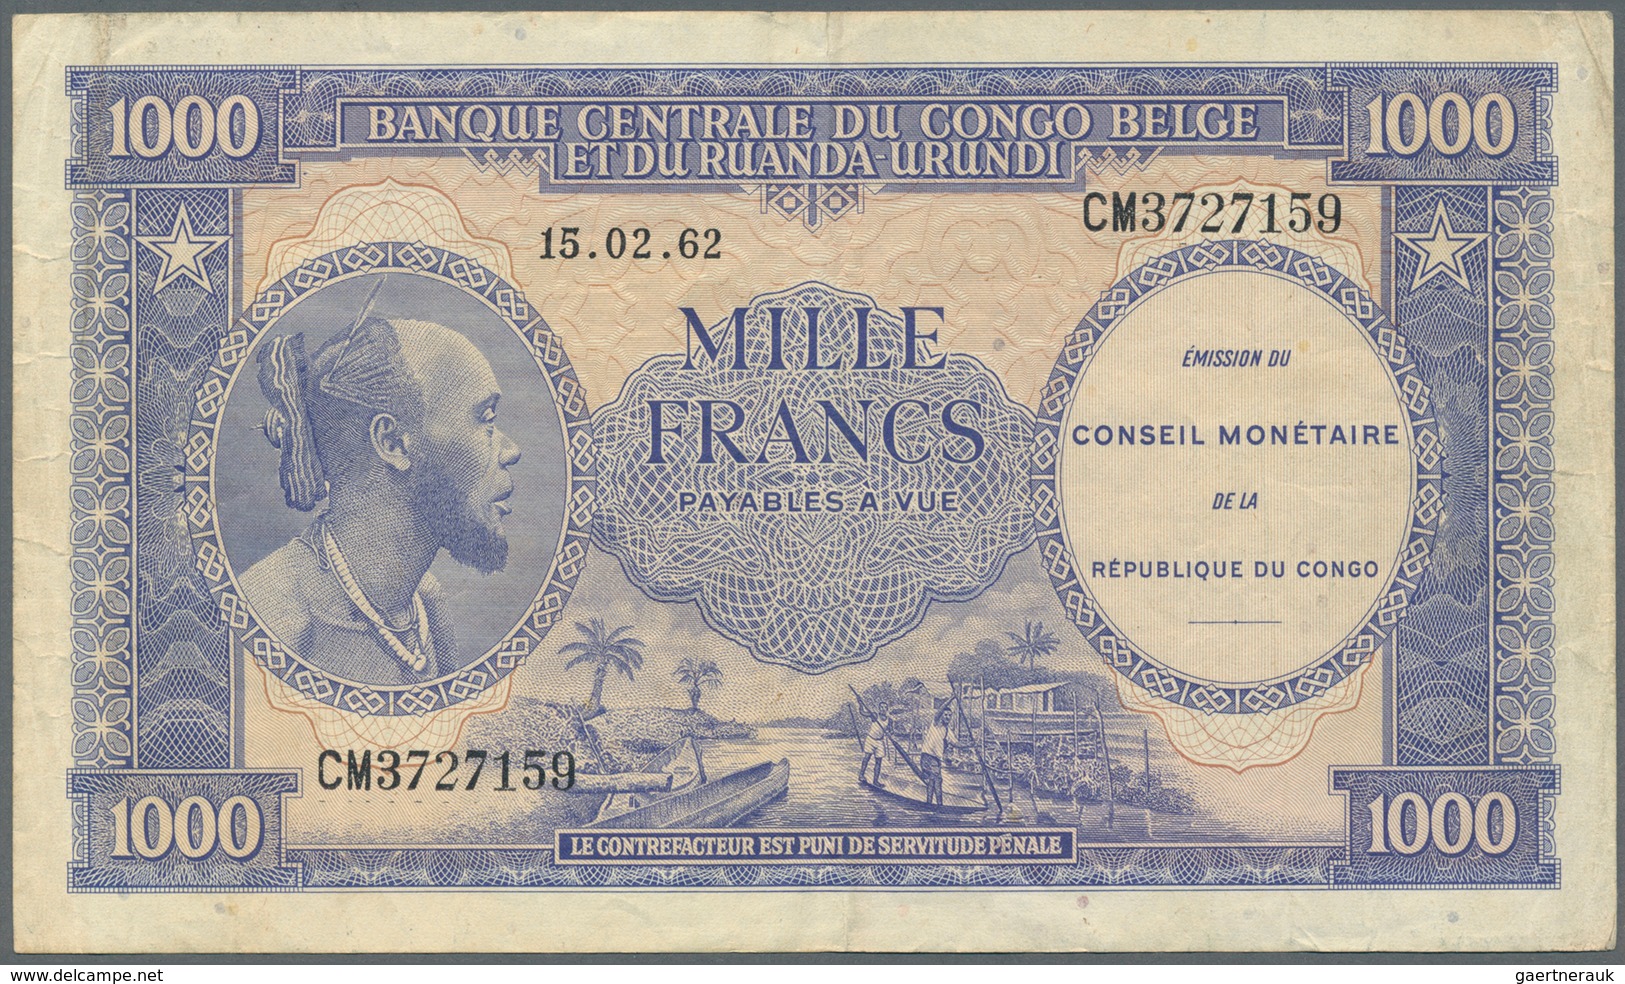 01317 Congo / Kongo: 1000 Francs 1962 P. 2, Used With Folds And Creases, No Holes Or Tears, Still Crispnes - Zonder Classificatie